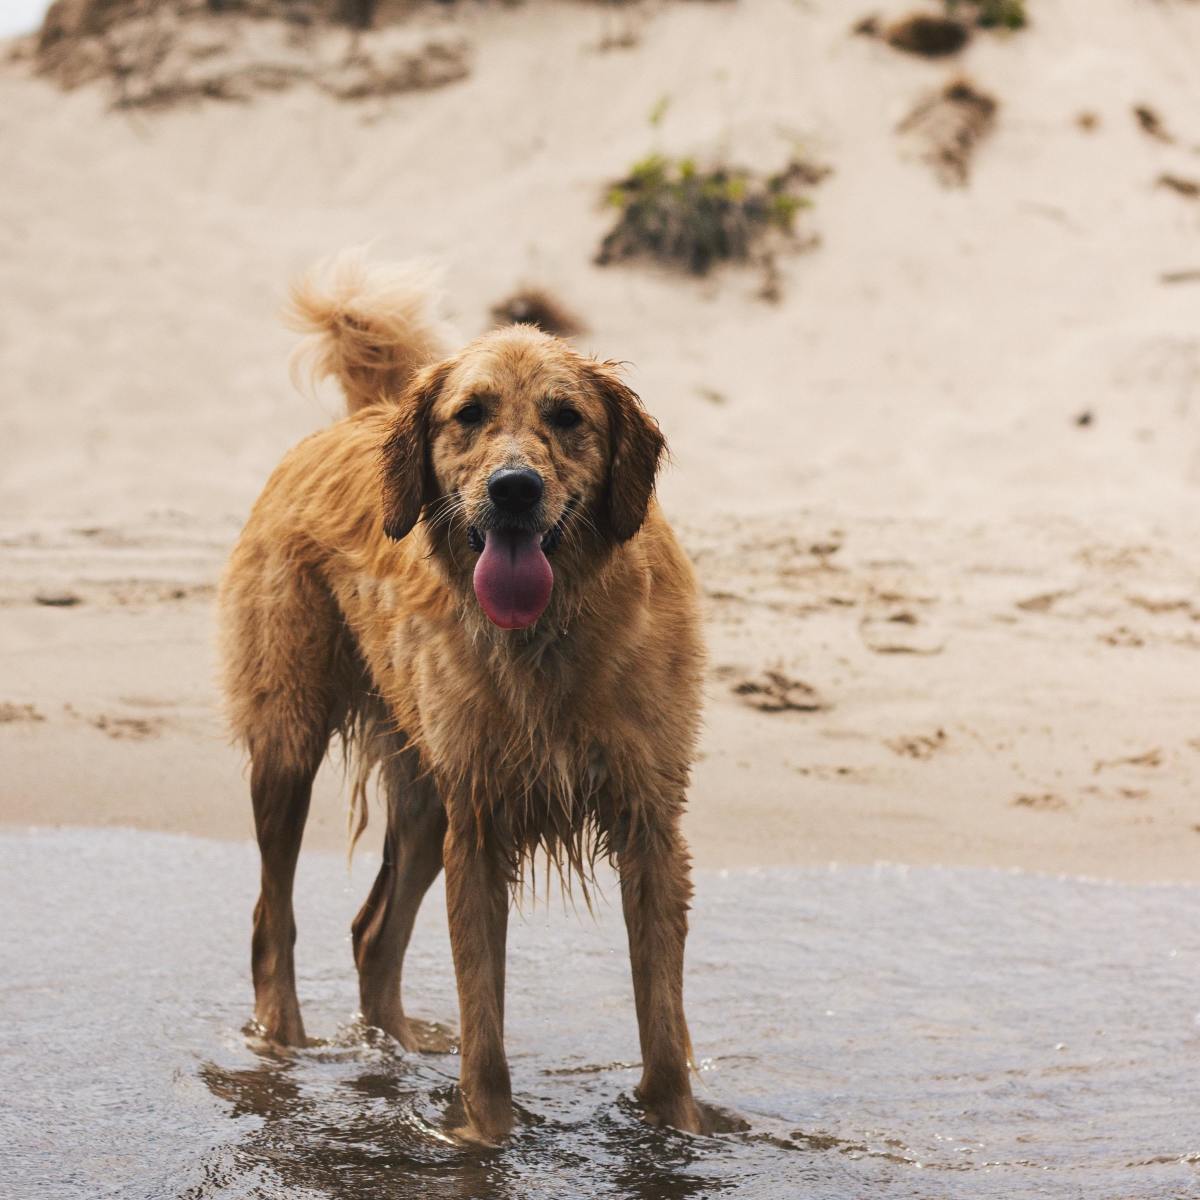 Consistently wet fur can be a problem, especially for Golden Retrievers, who are already prone to skin issues. 